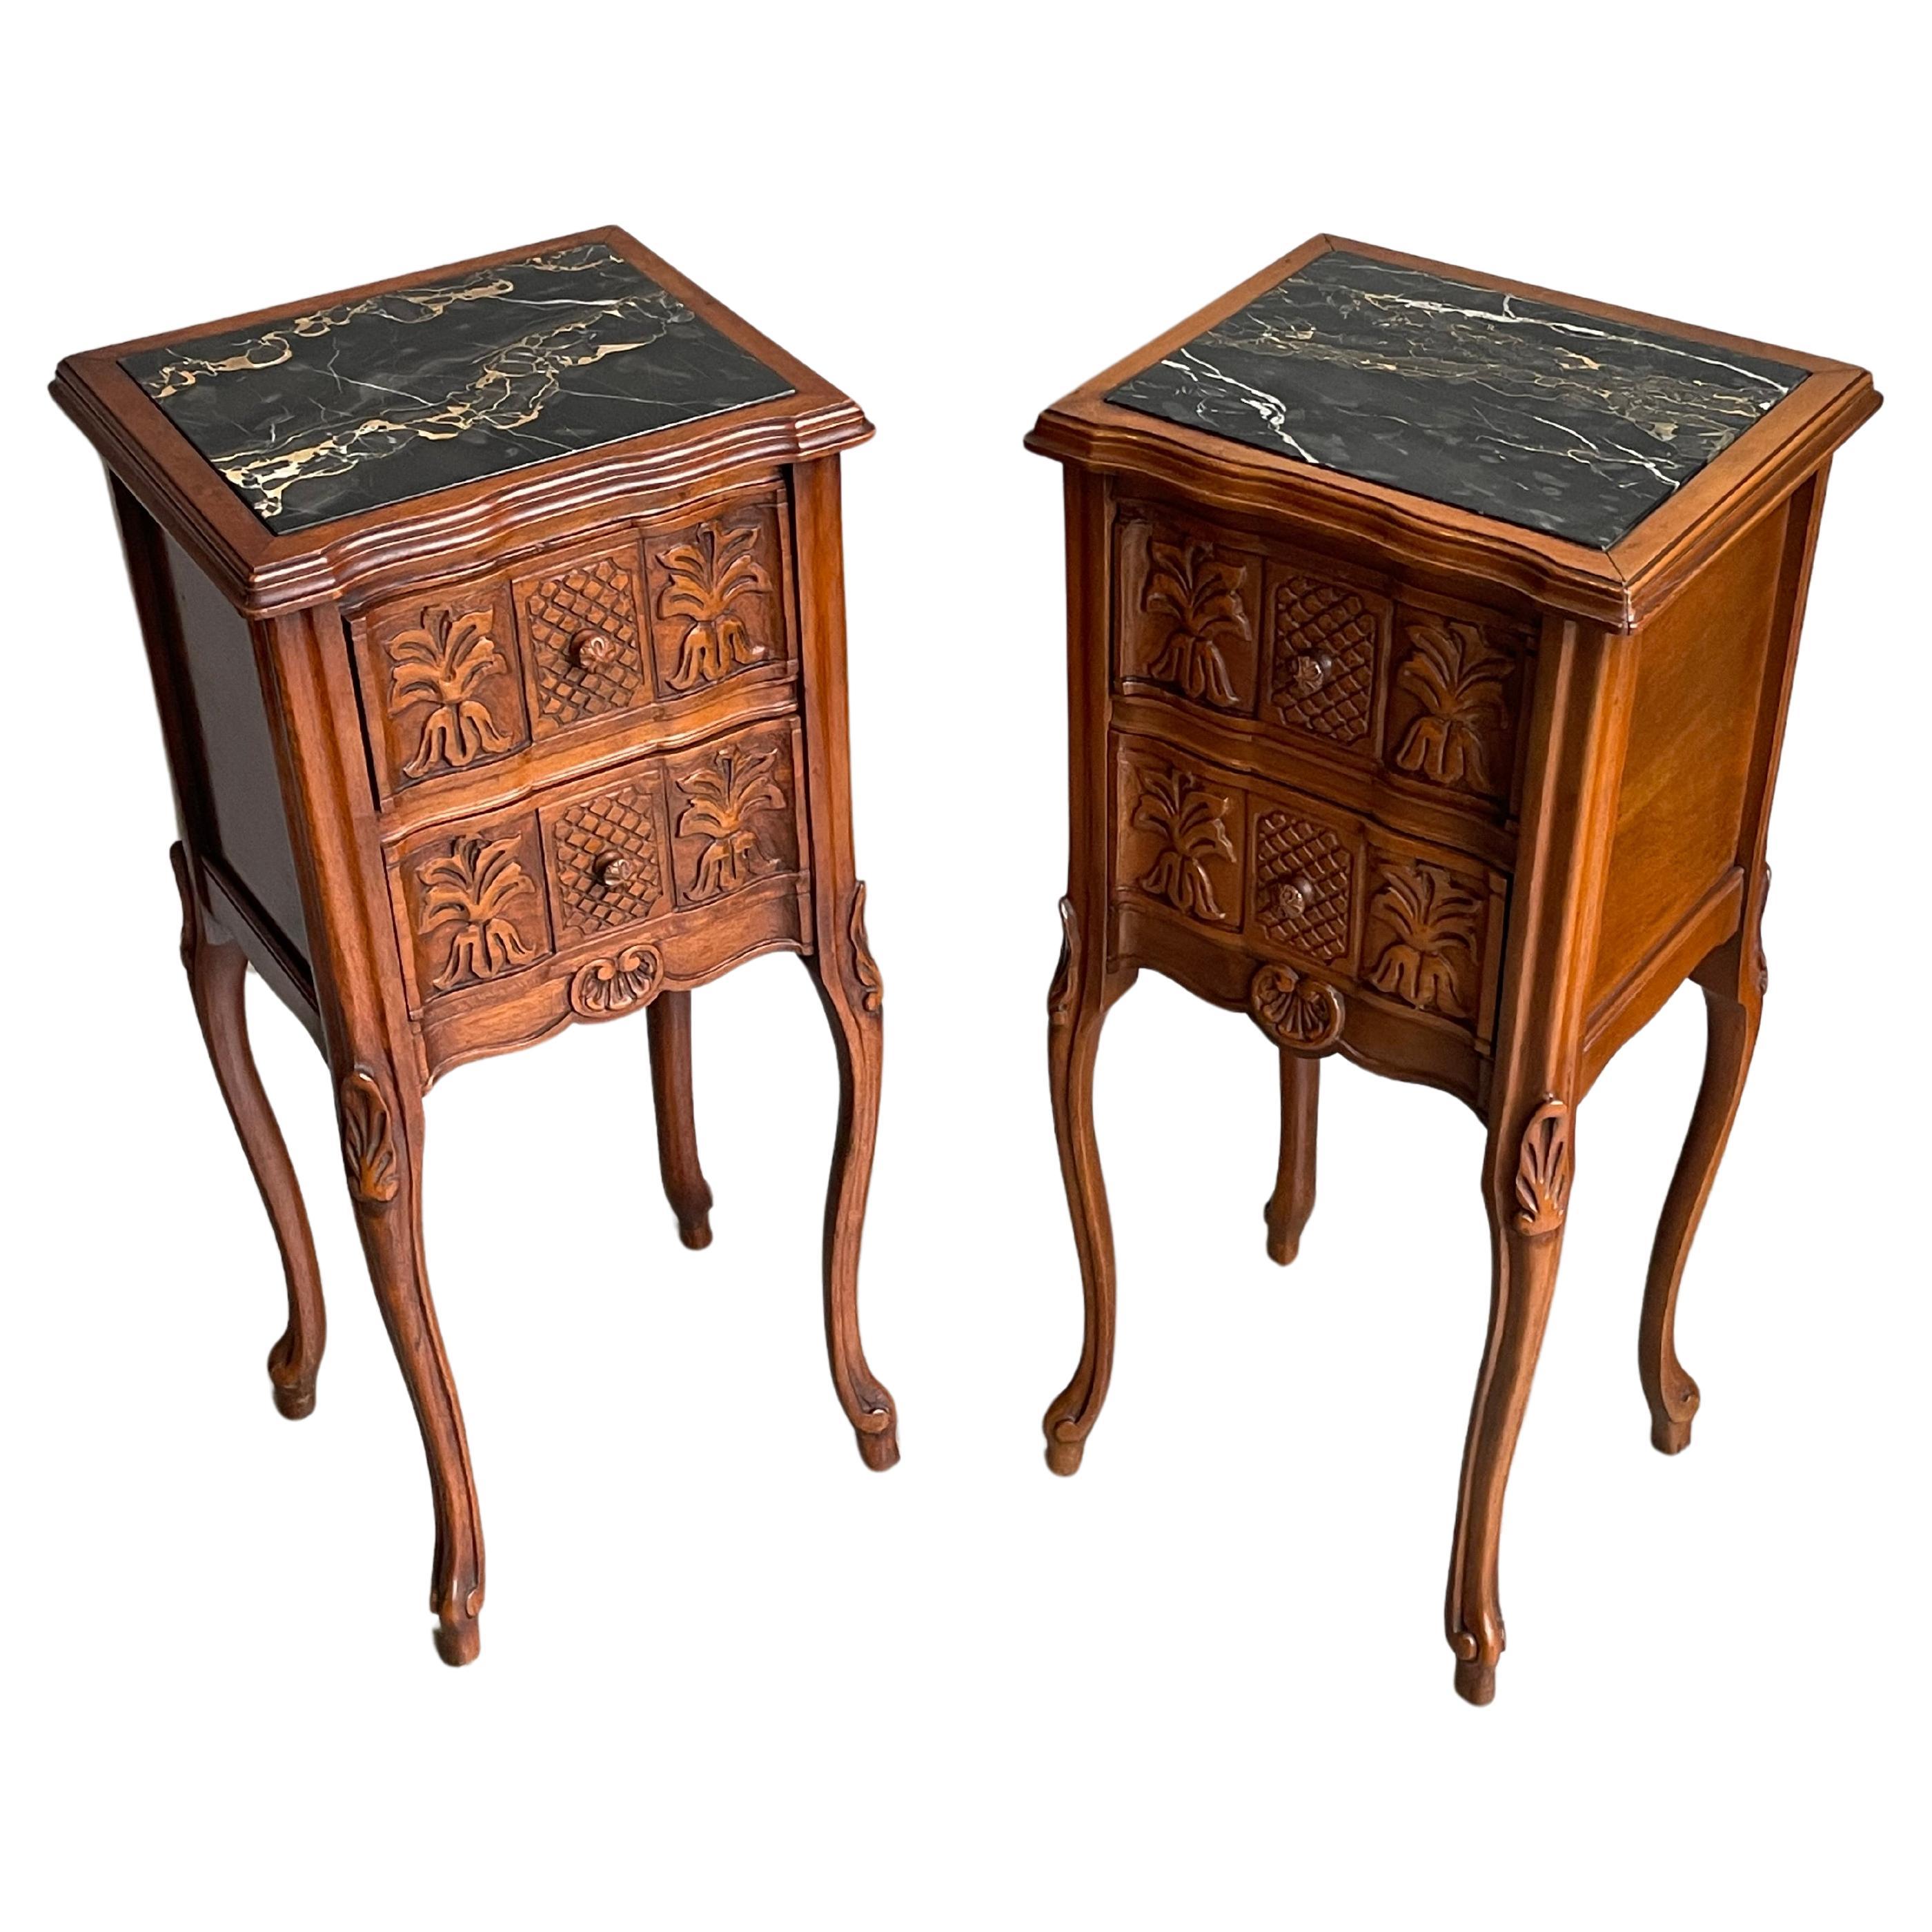 Antique Pair of Nutwood Bedside Cabinets / Nightstands with Stunning Marble Tops For Sale